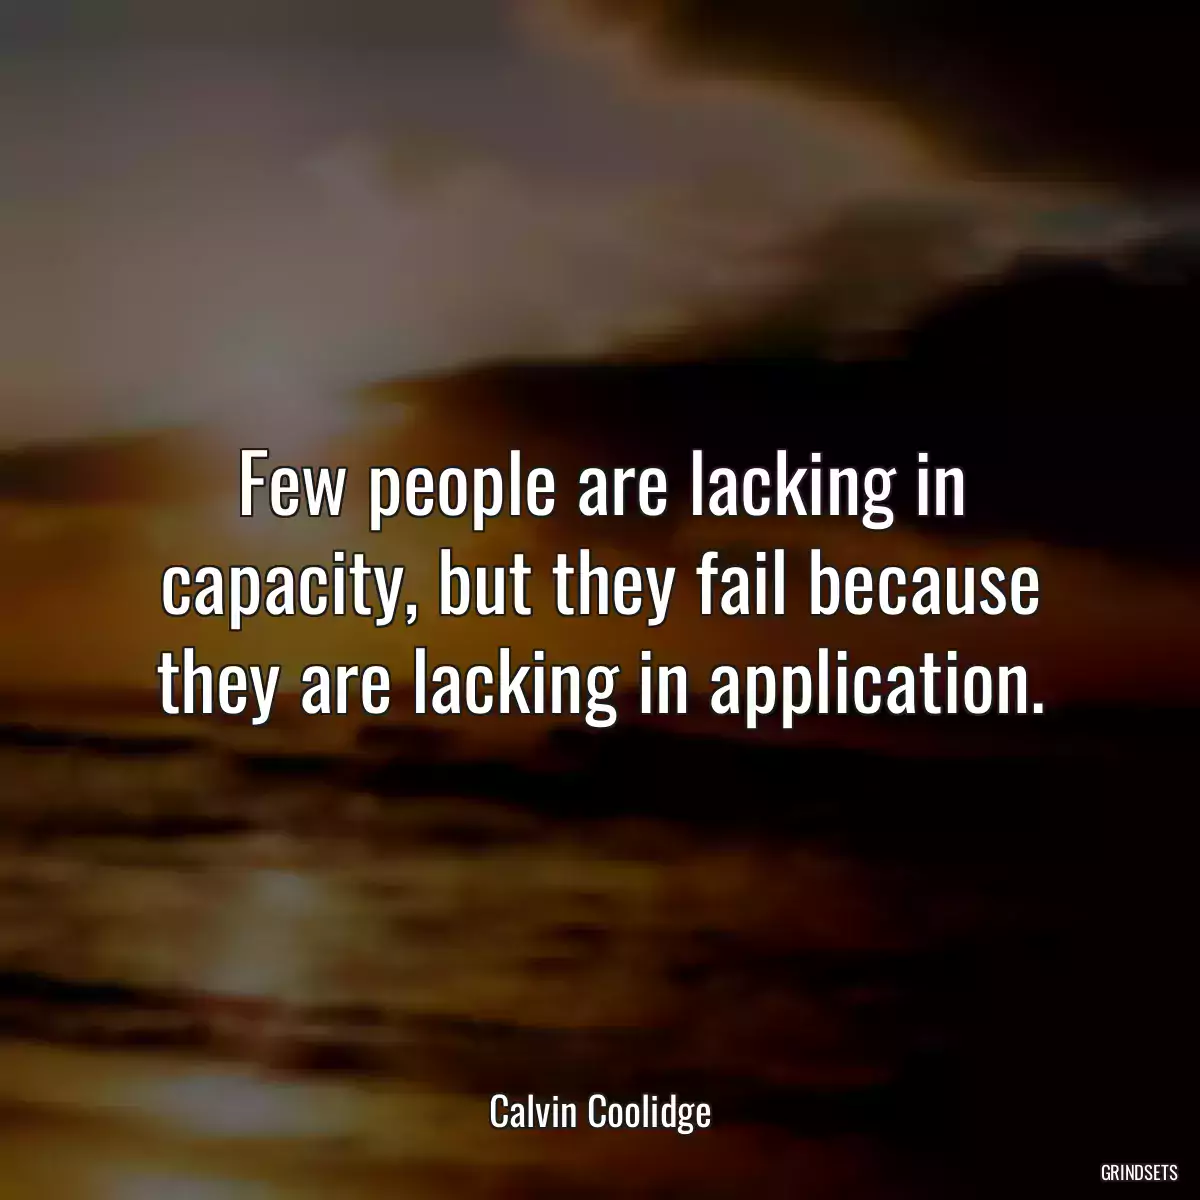 Few people are lacking in capacity, but they fail because they are lacking in application.